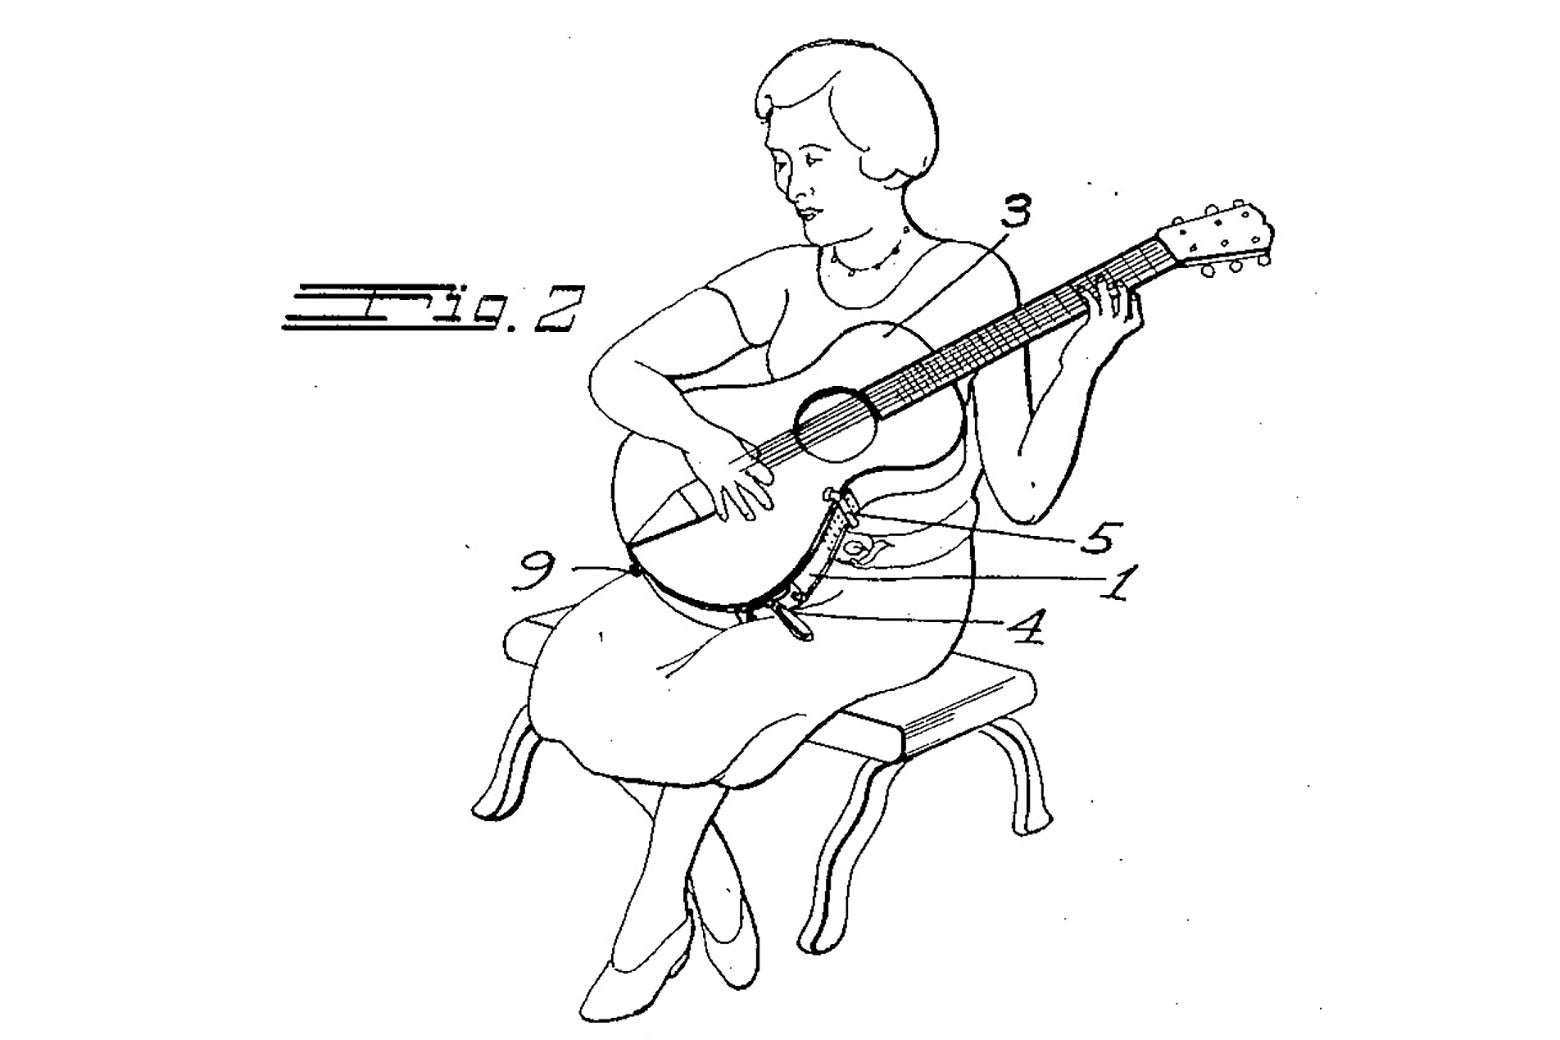 A drawing of a woman playing classical guitar.